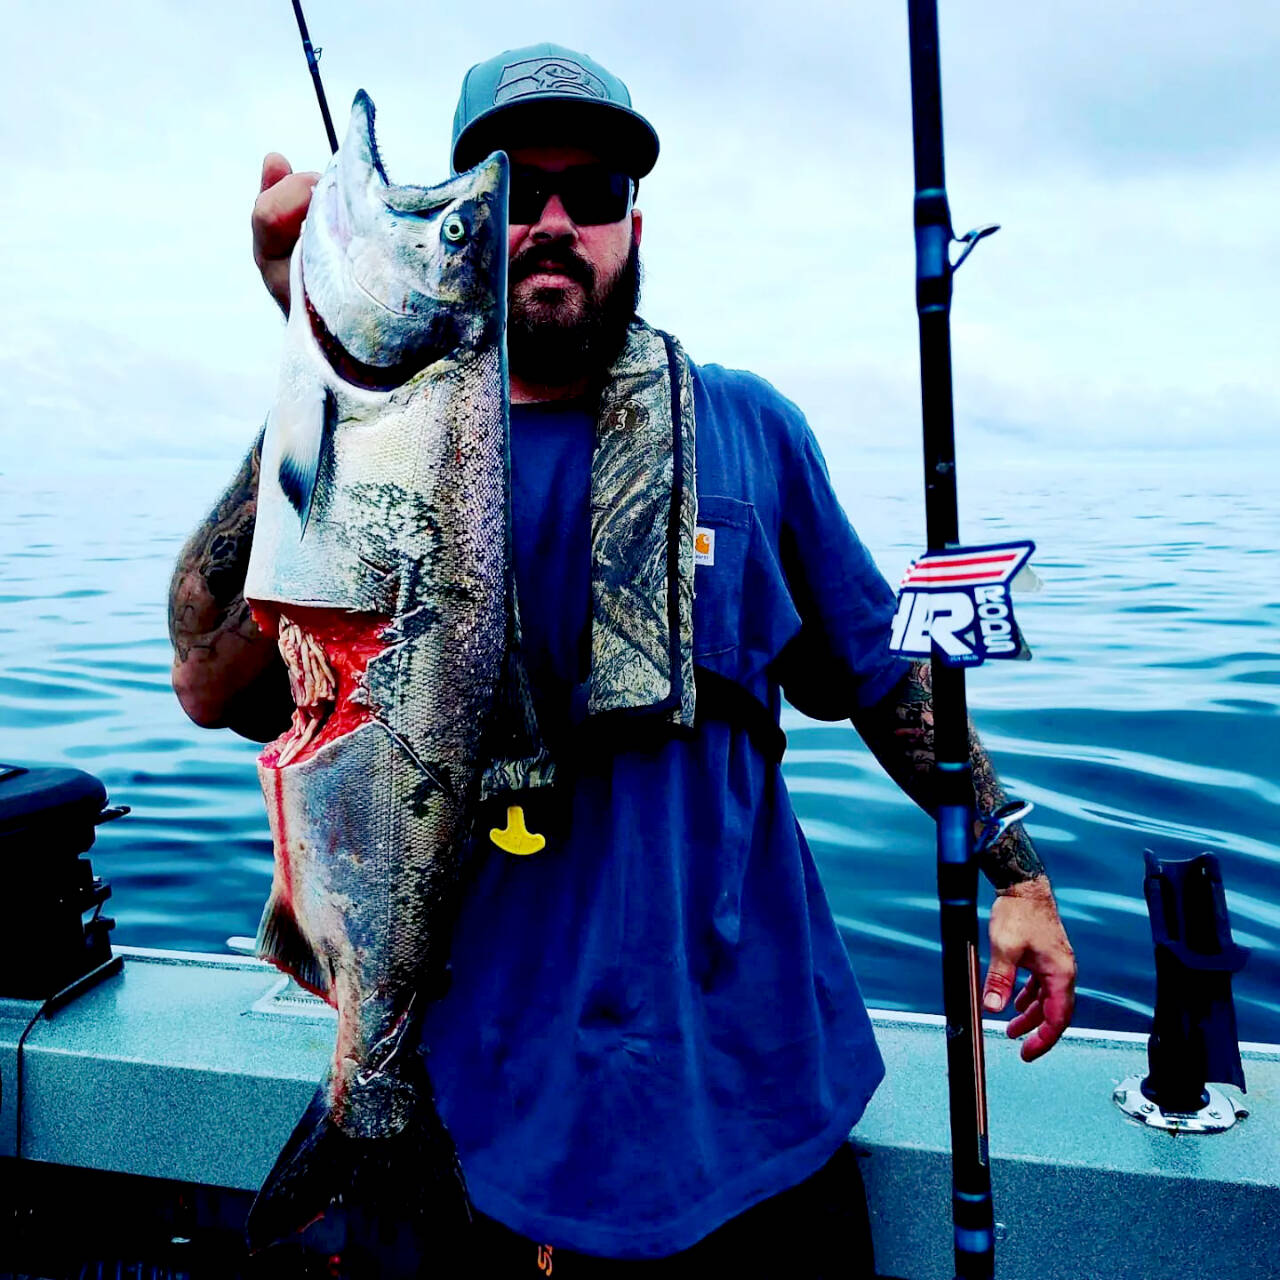 Courtesy Photo
Angler Rob Robinson of Double R Squid Jigs said a thresher shark took this bite out of his hooked king before he could bring it on board. Robinson was fishing off La Push with Outlander Charters.